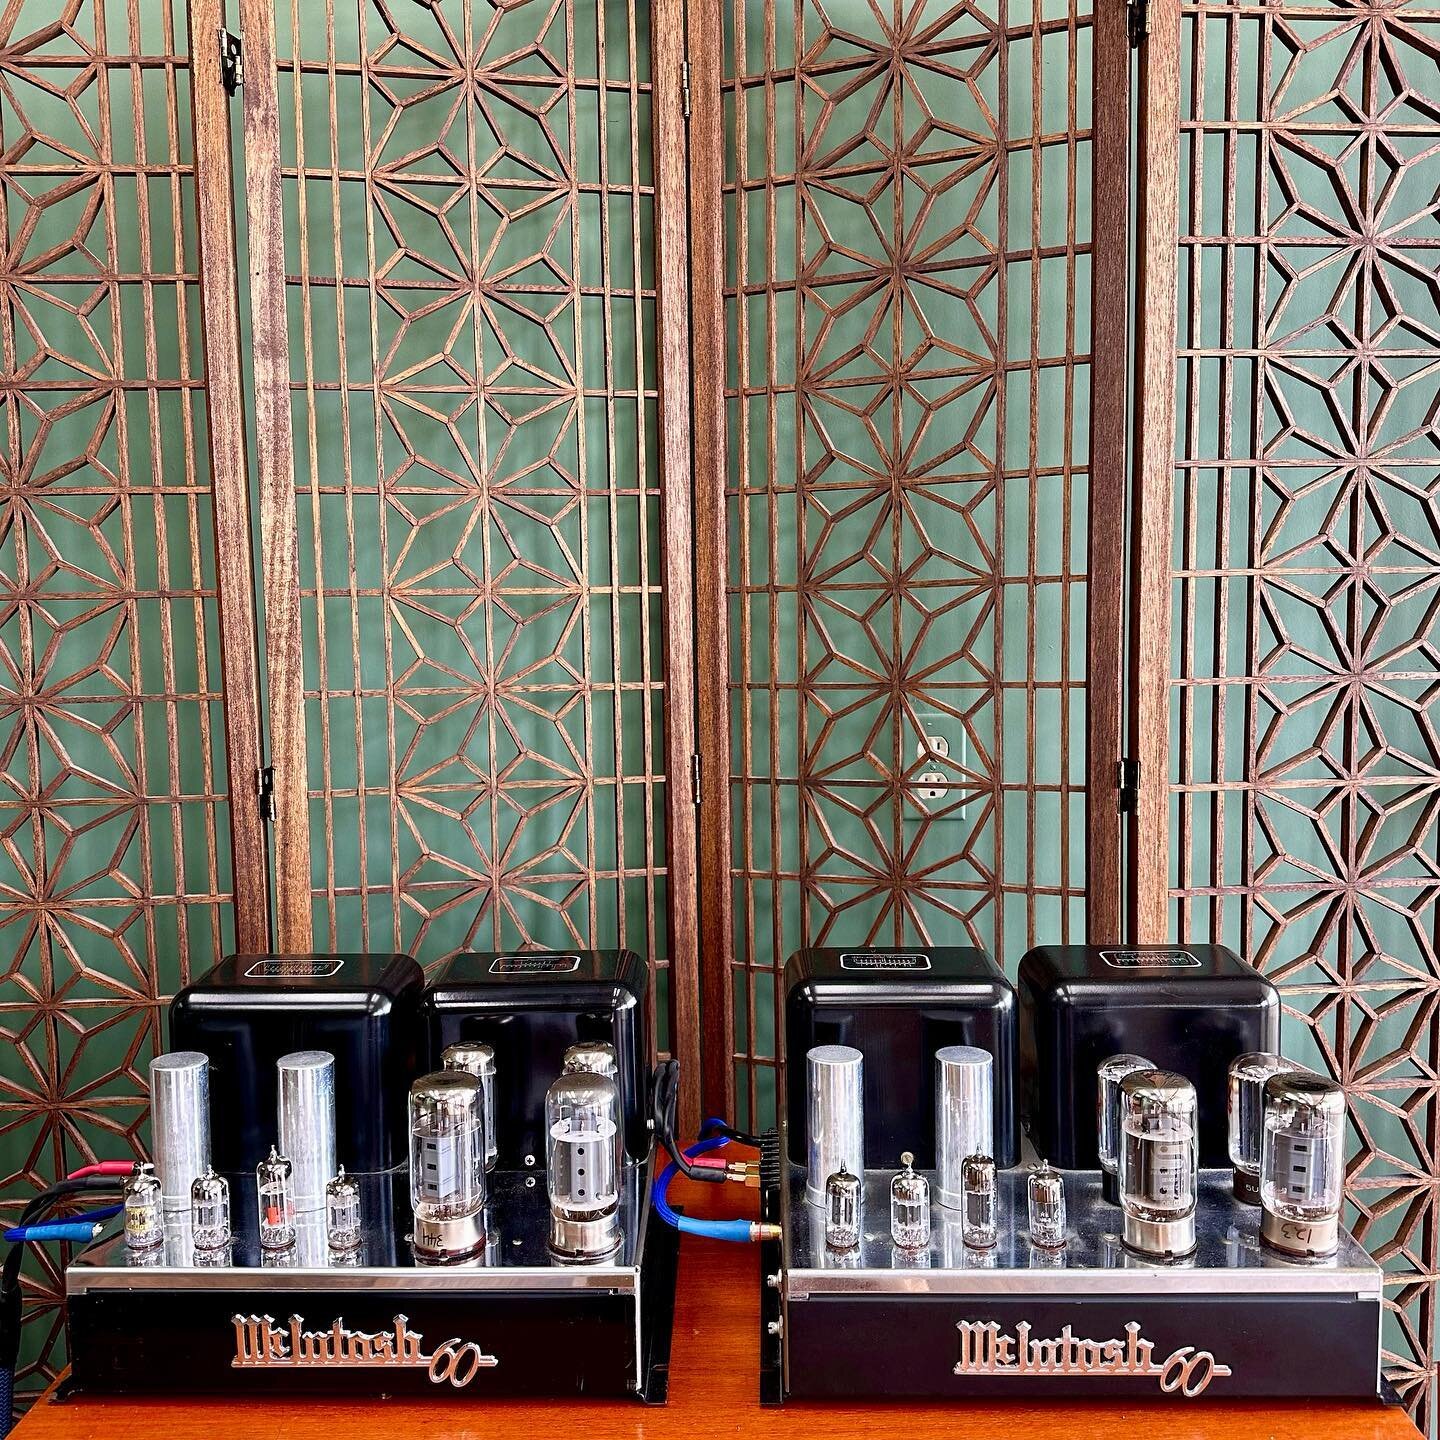 [AVAILABLE] Today it&rsquo;s time for some &ldquo;holy grail&rdquo; level vintage audio! 🤯
These McIntosh MC60 monoblocks were completely restored by Classic Tube Audio in Oregon (one of the most well respected McIntosh specialists in the US) and in